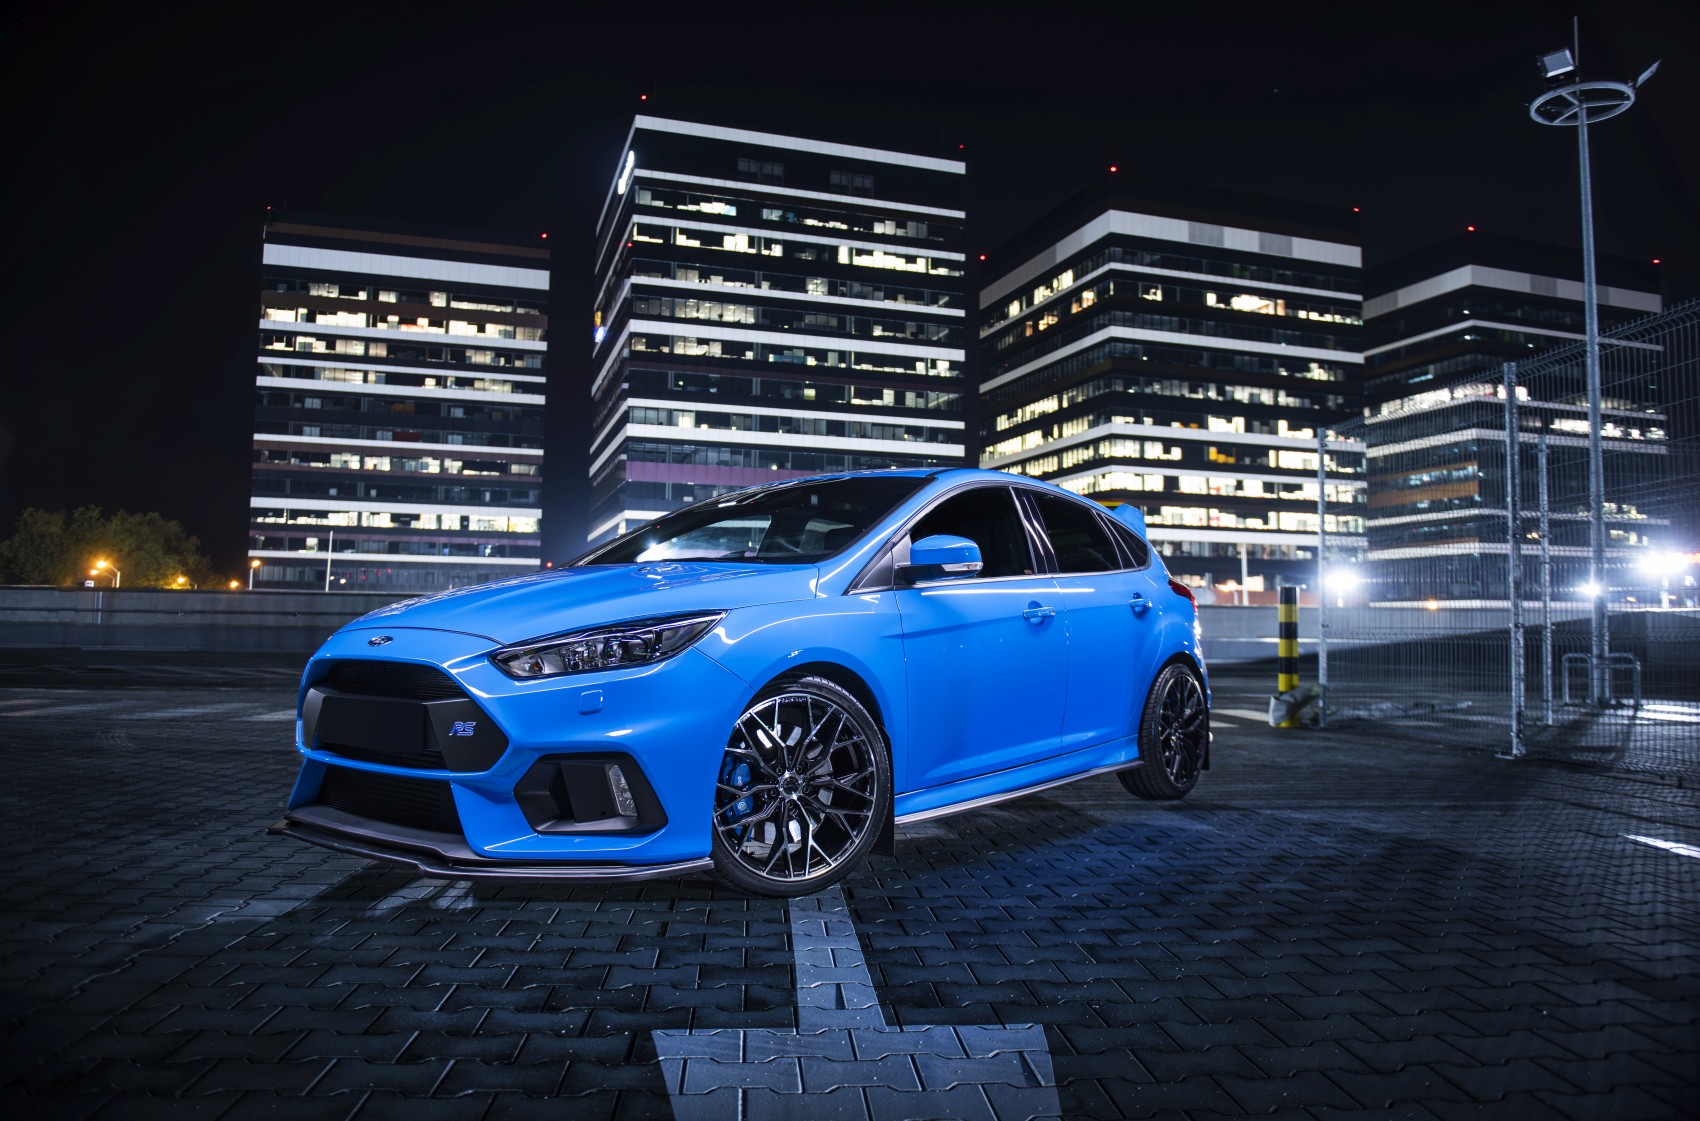 Ford Focus RS Mk3 with 19×8.5-inch Concaver CVR1